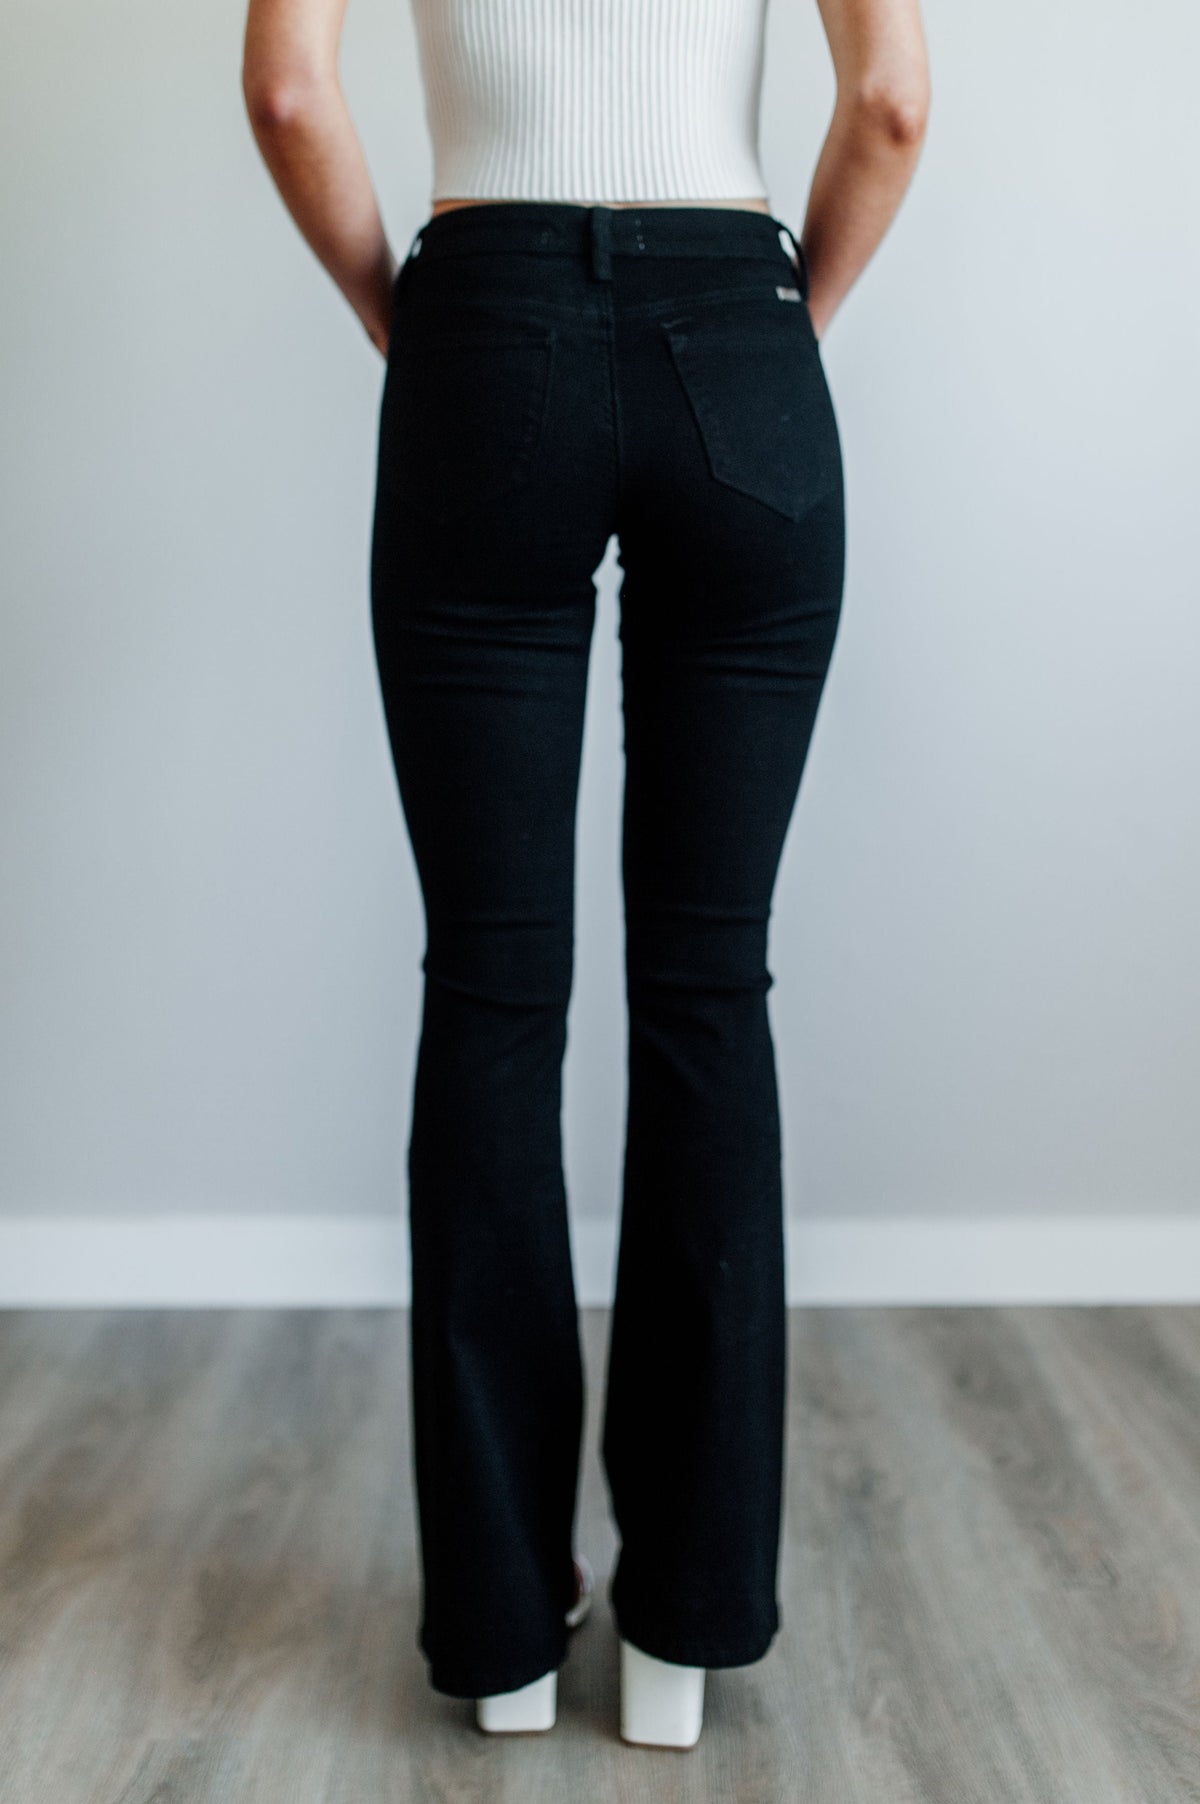 Pictured is a black pair of denim with a mid-rise fit with a slim body and flare at the bottom.